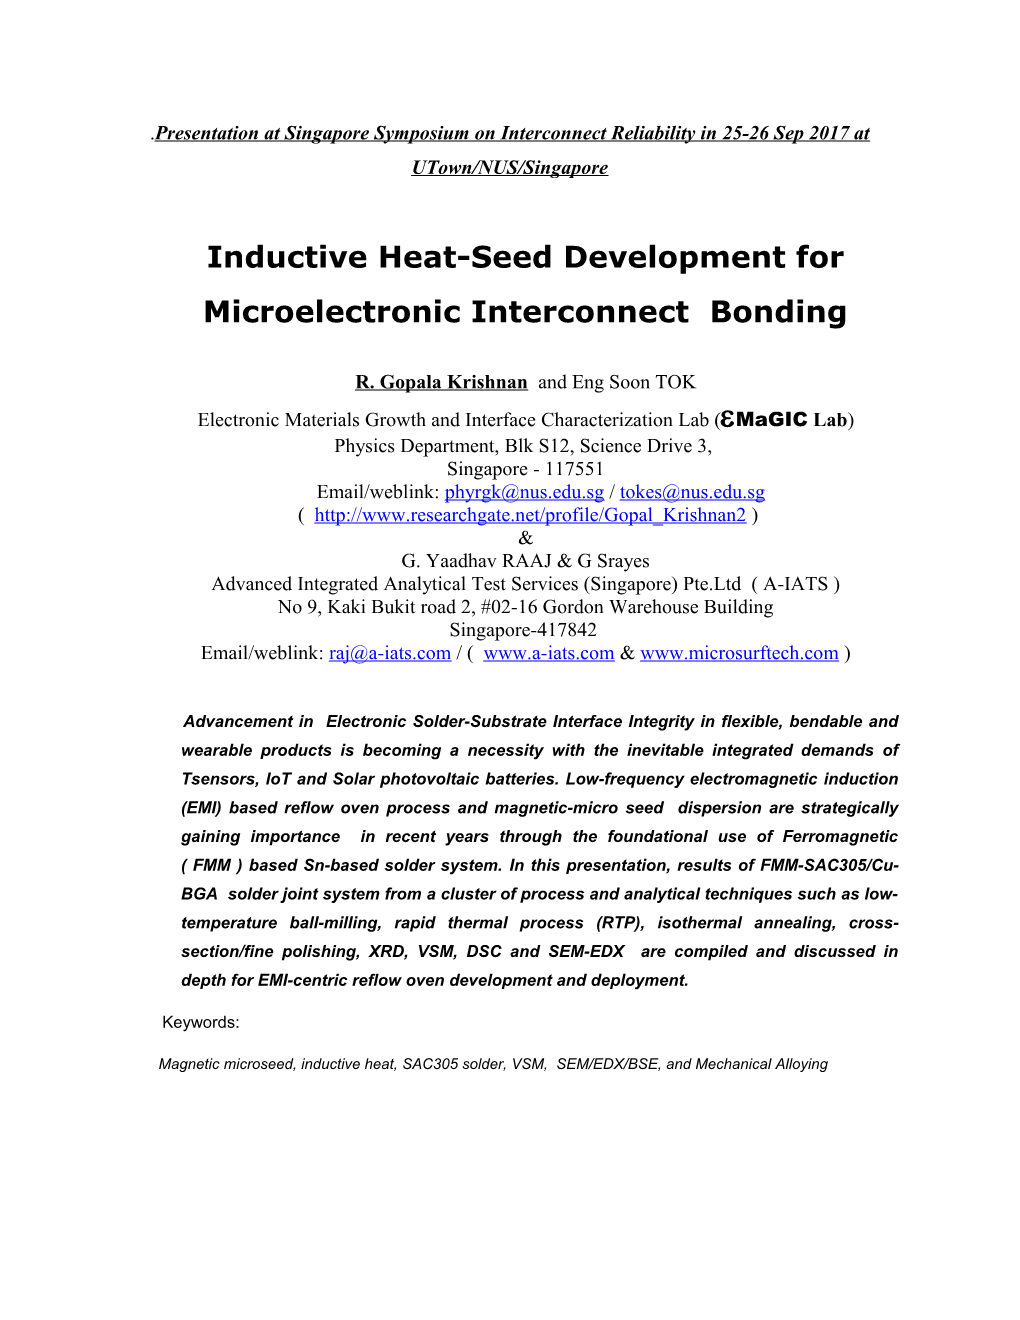 Inductive Heat-Seed Development For